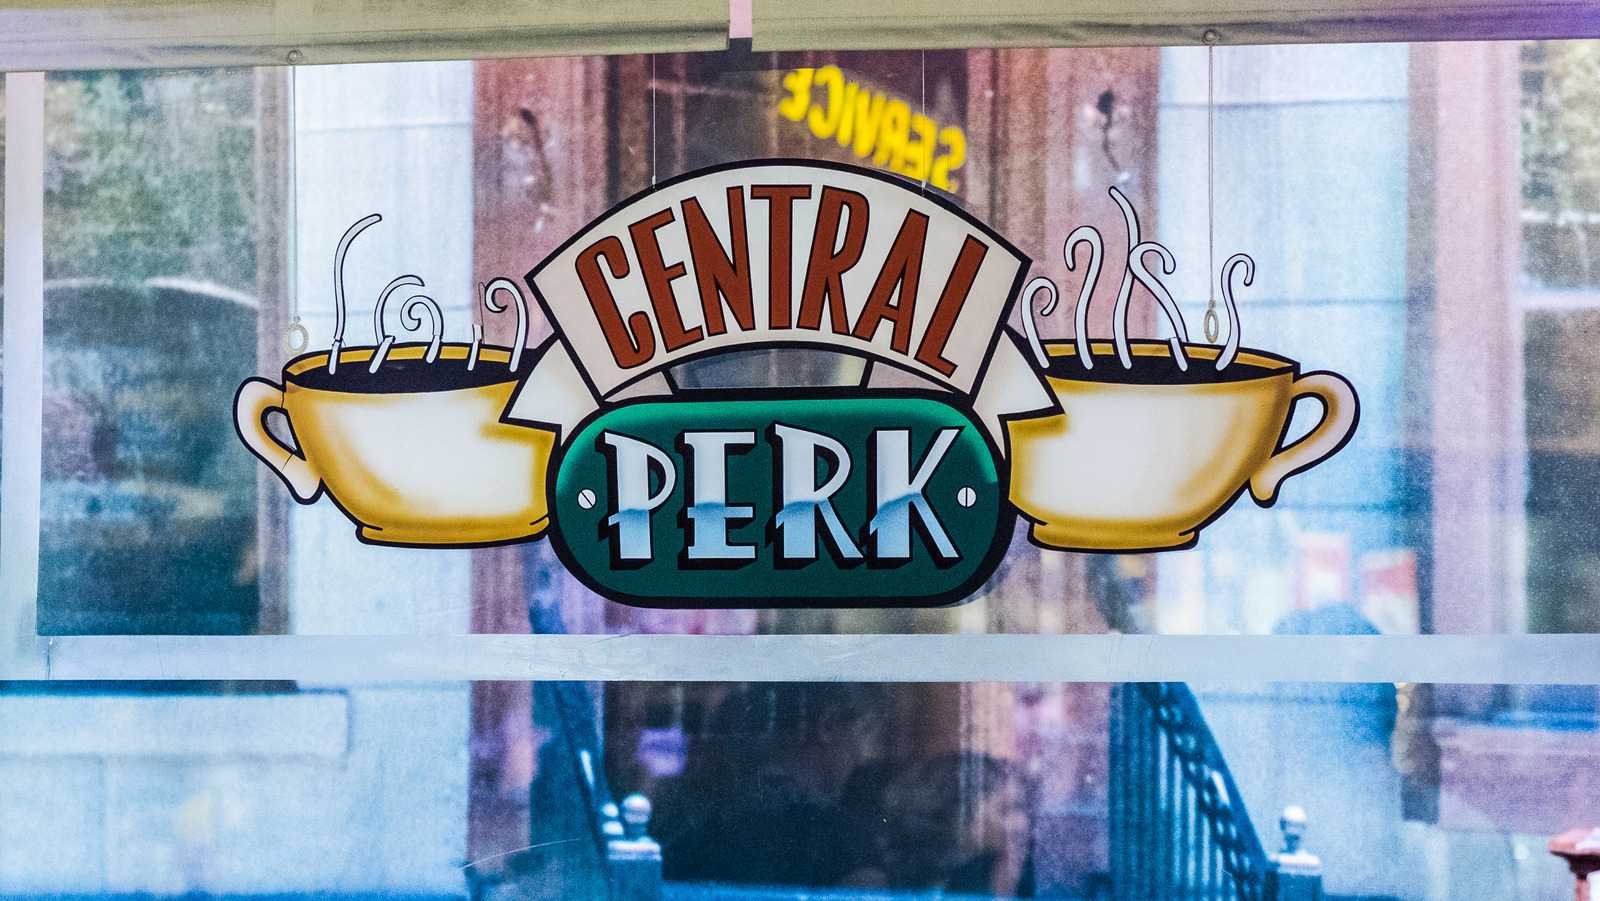 What We Know About Central Perk On Friends